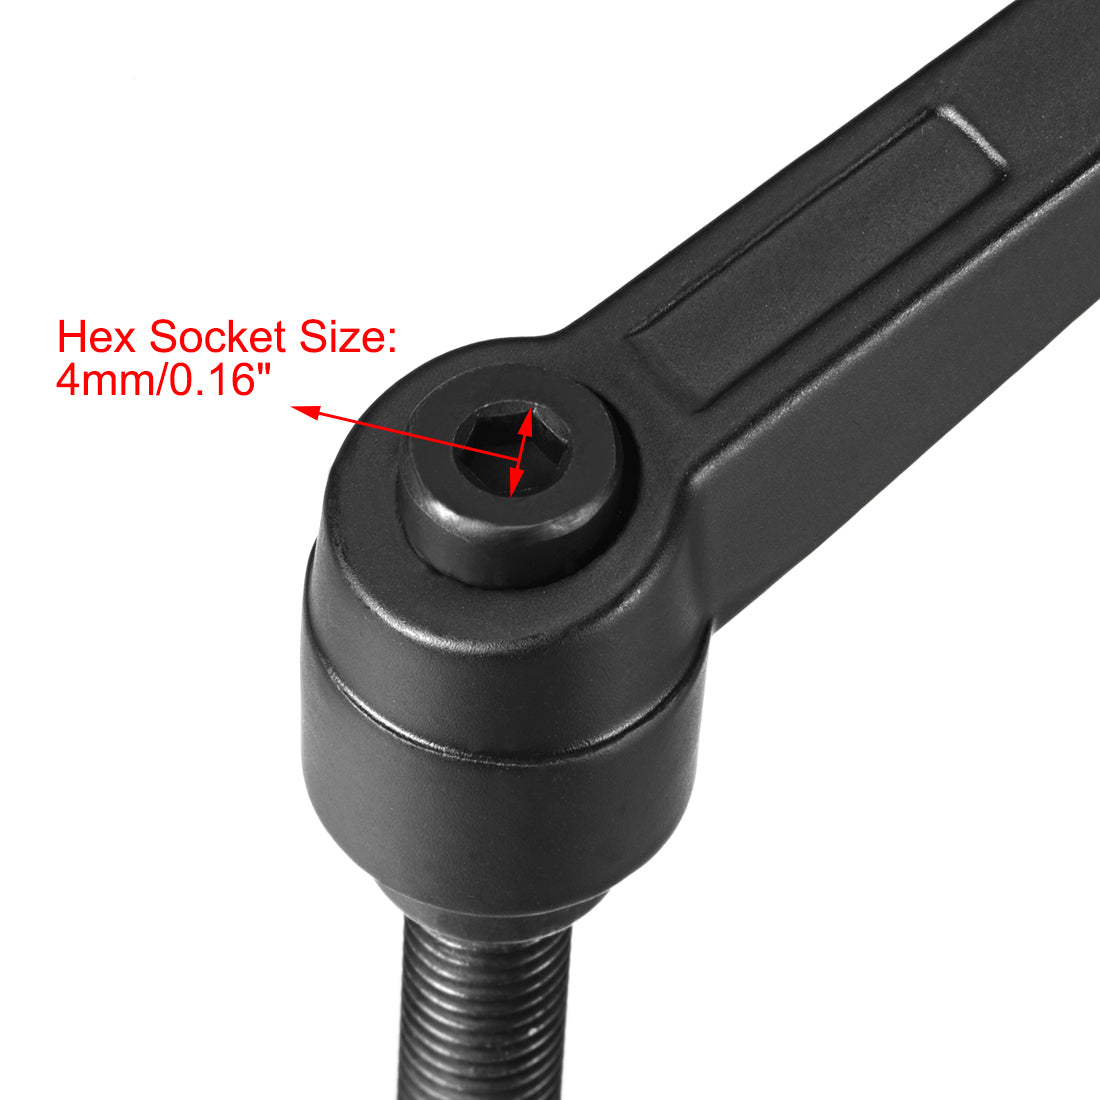 Uxcell Uxcell M12 x 60mm Handle Adjustable Clamping Lever Thread Push Button Ratchet Male Threaded Stud